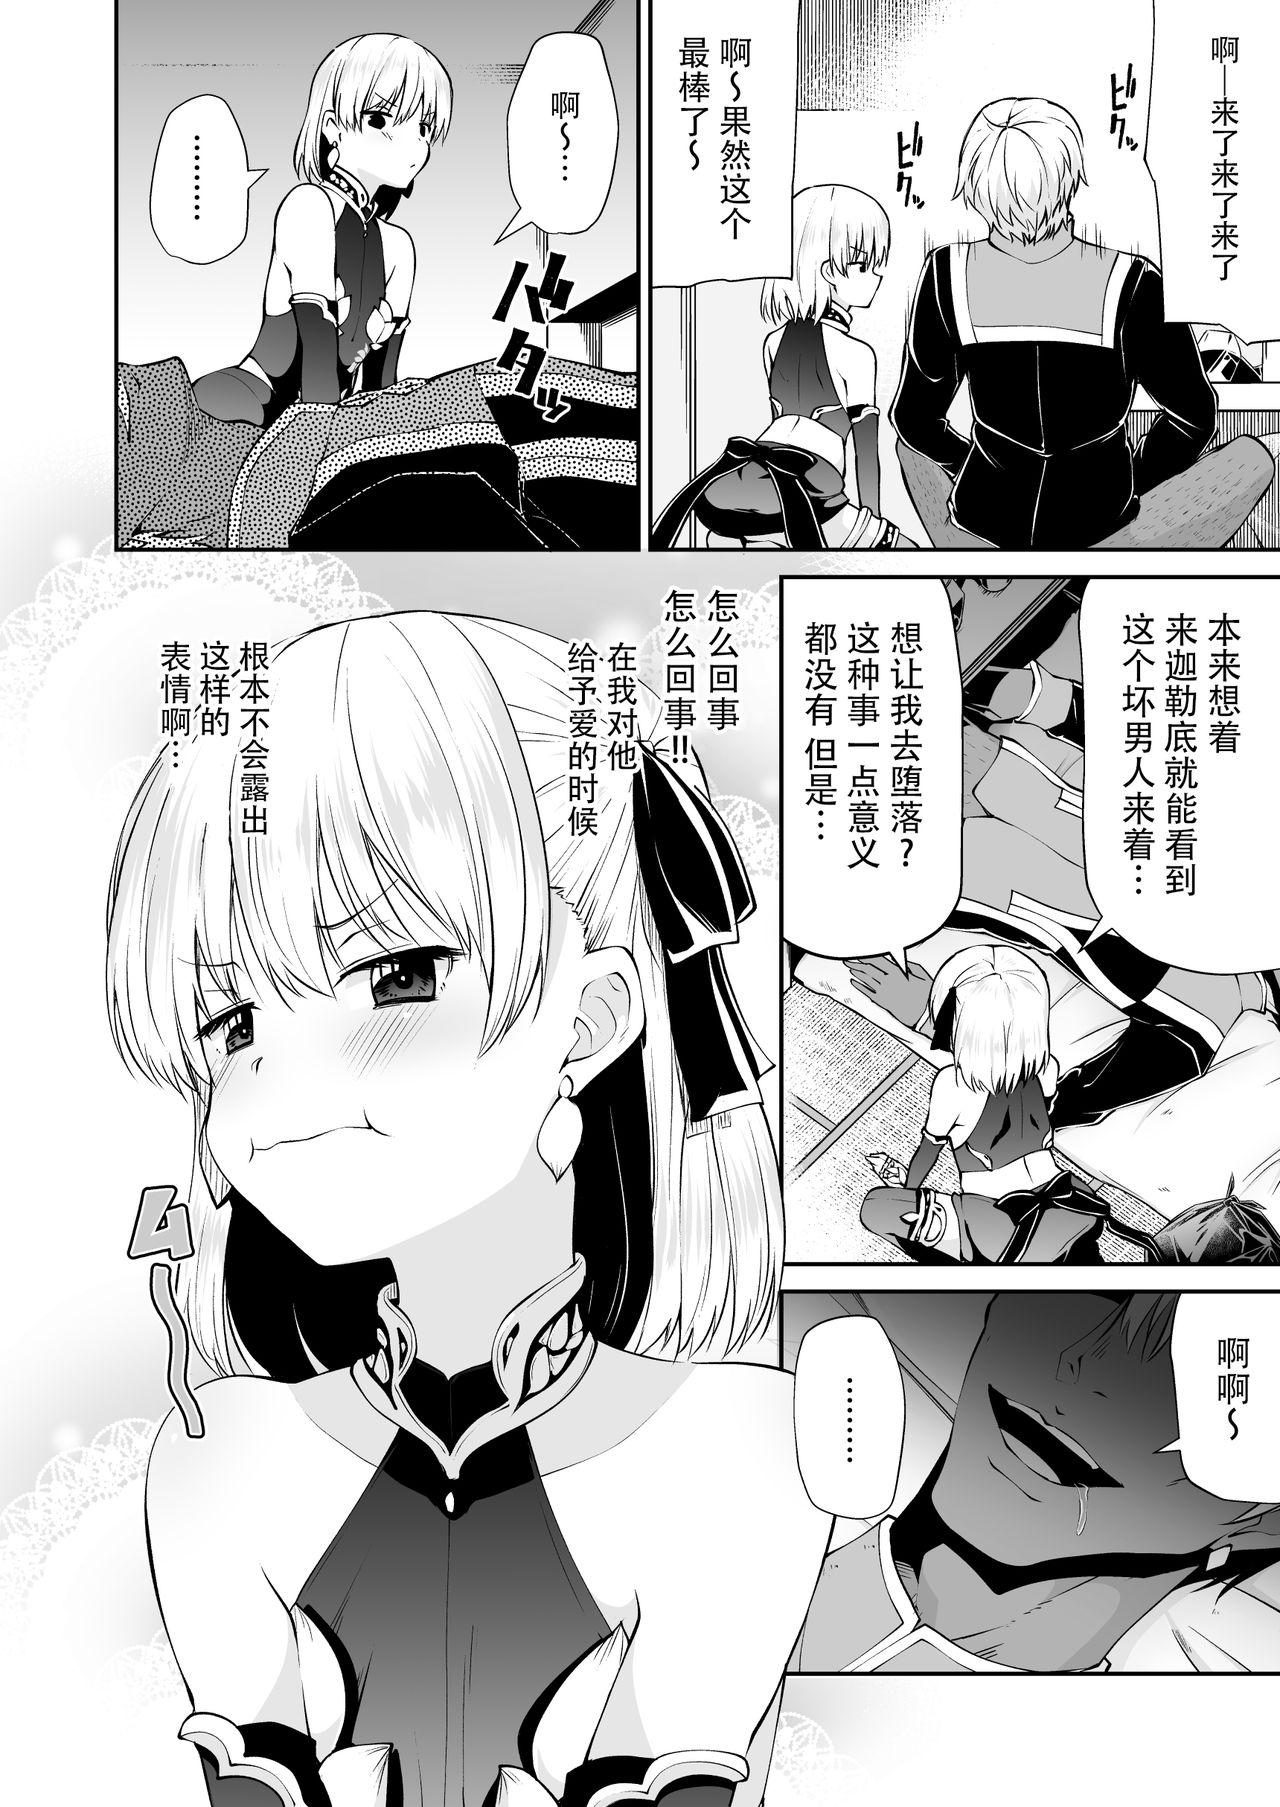 Assfucking [Kitsuneya (Leafy)] Kama-chan to Love-prescription | 小伽摩的爱的処方药 (Fate/Grand Order) [Chinese] [牛肝菌汉化] [Digital] - Fate grand order Colombiana - Page 6